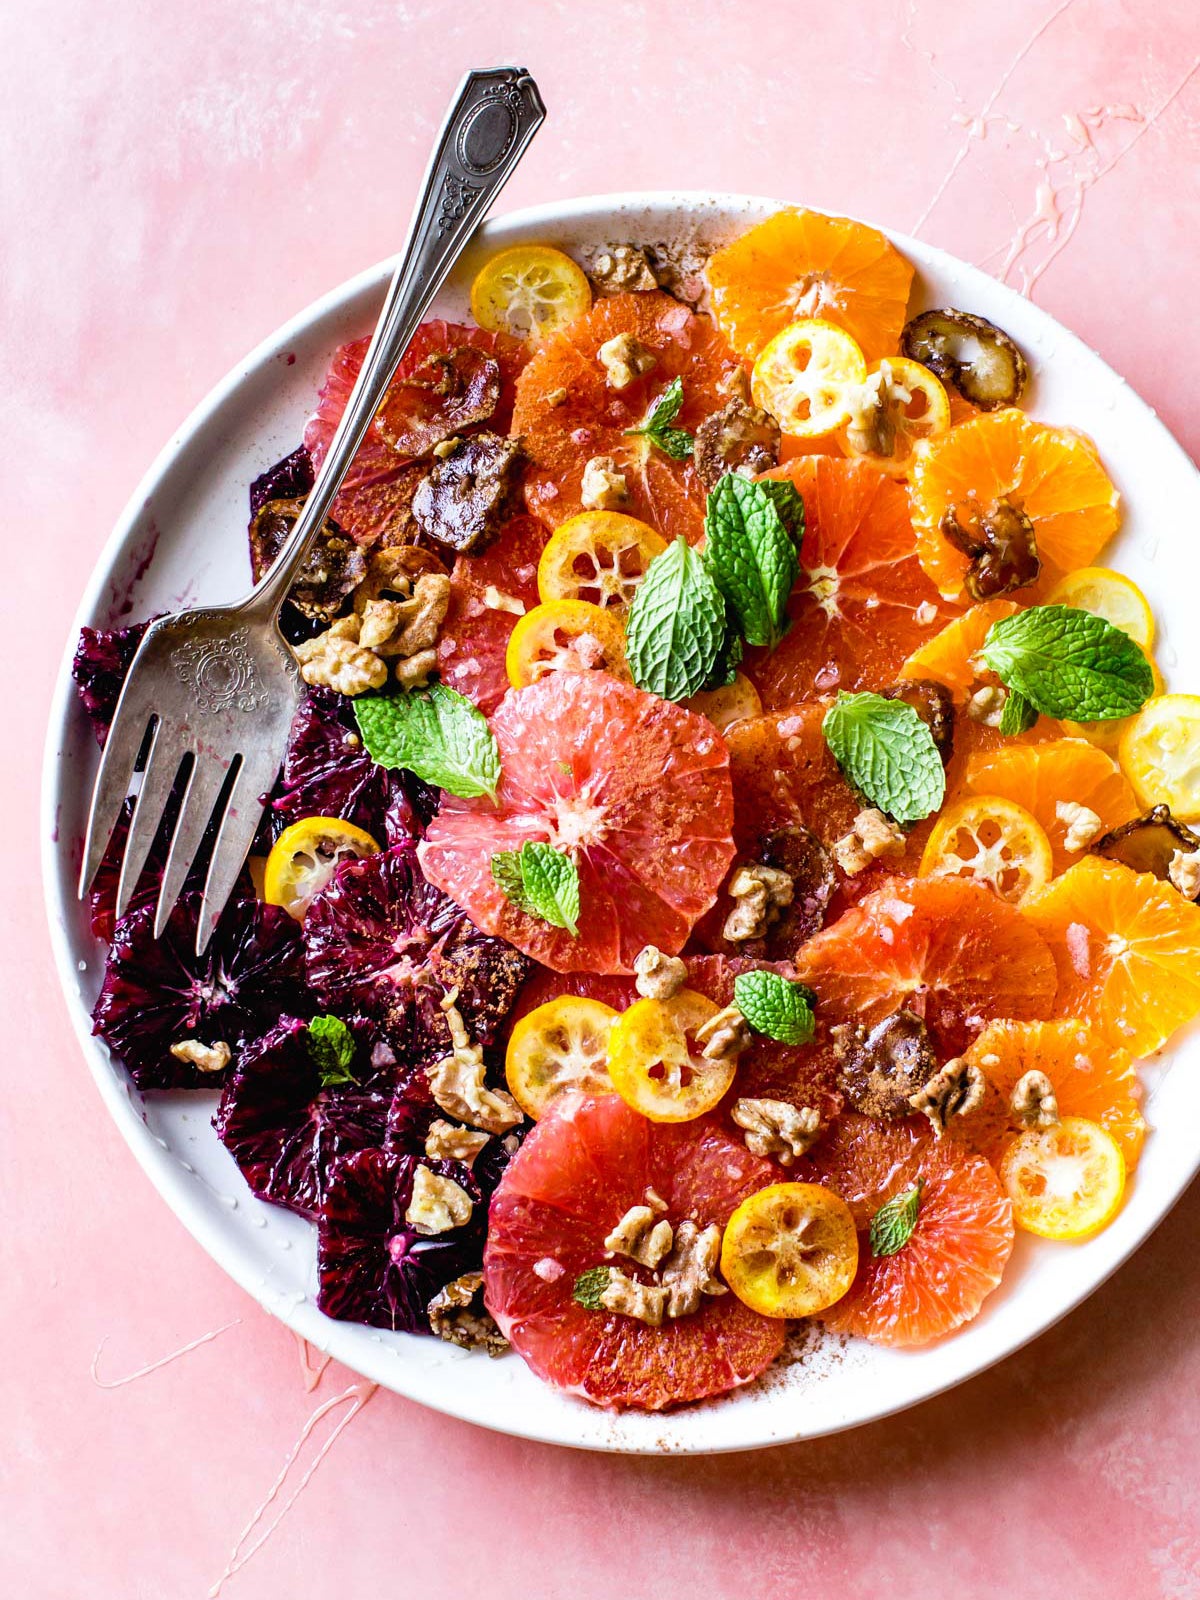 Citrus salad with walnuts and dates